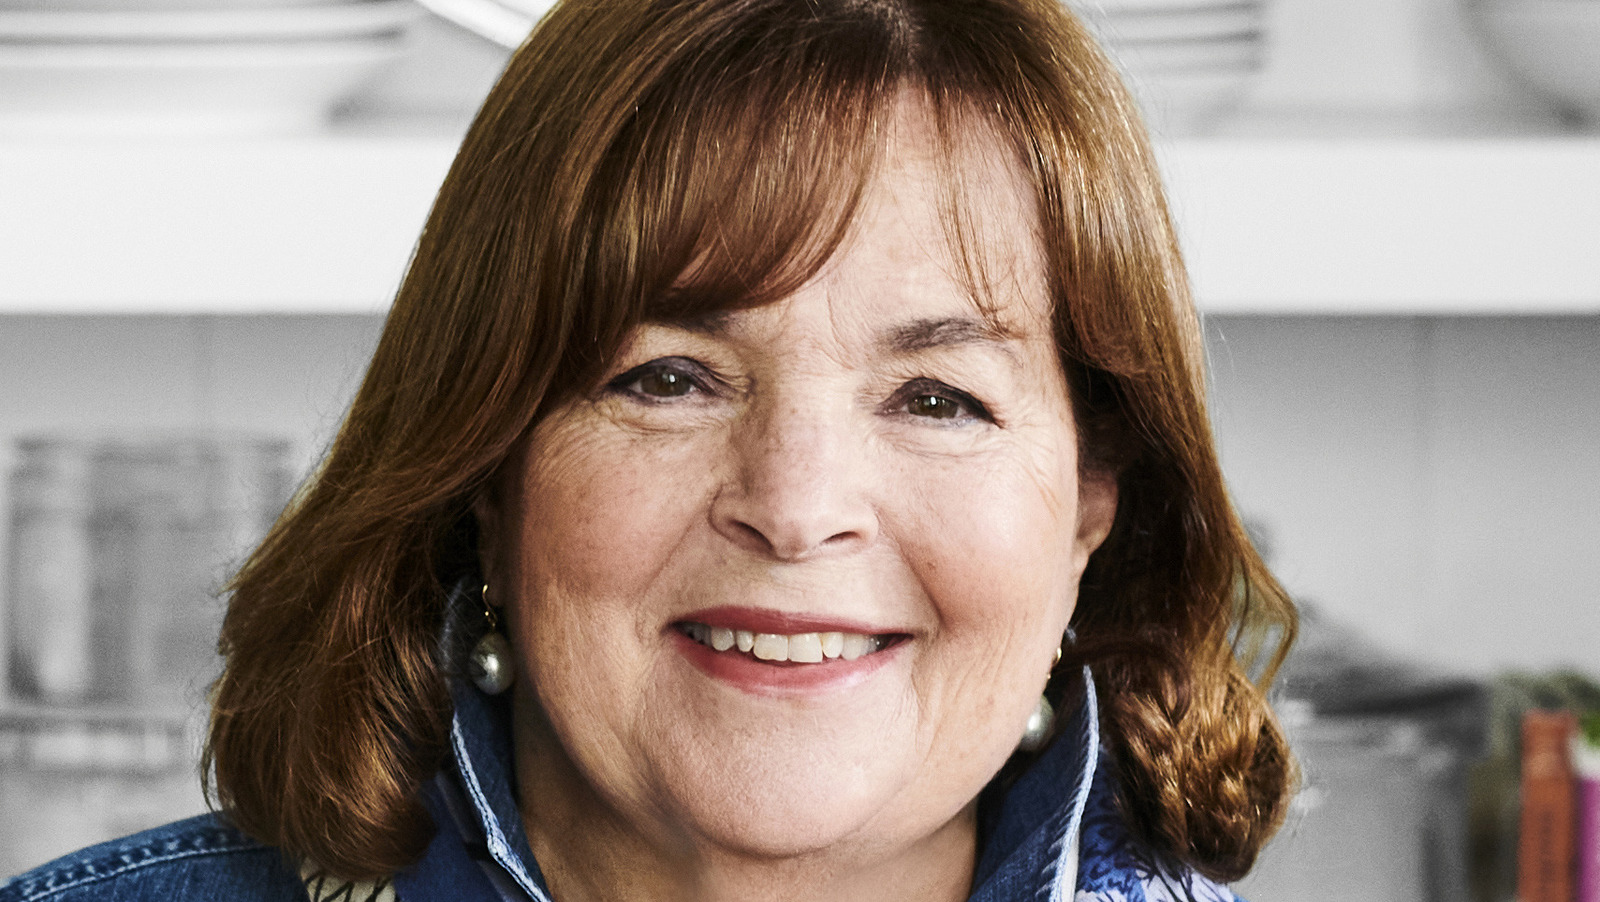 How To Score Tickets To Ina Garten's Celeb-Studded Virtual Book Tour